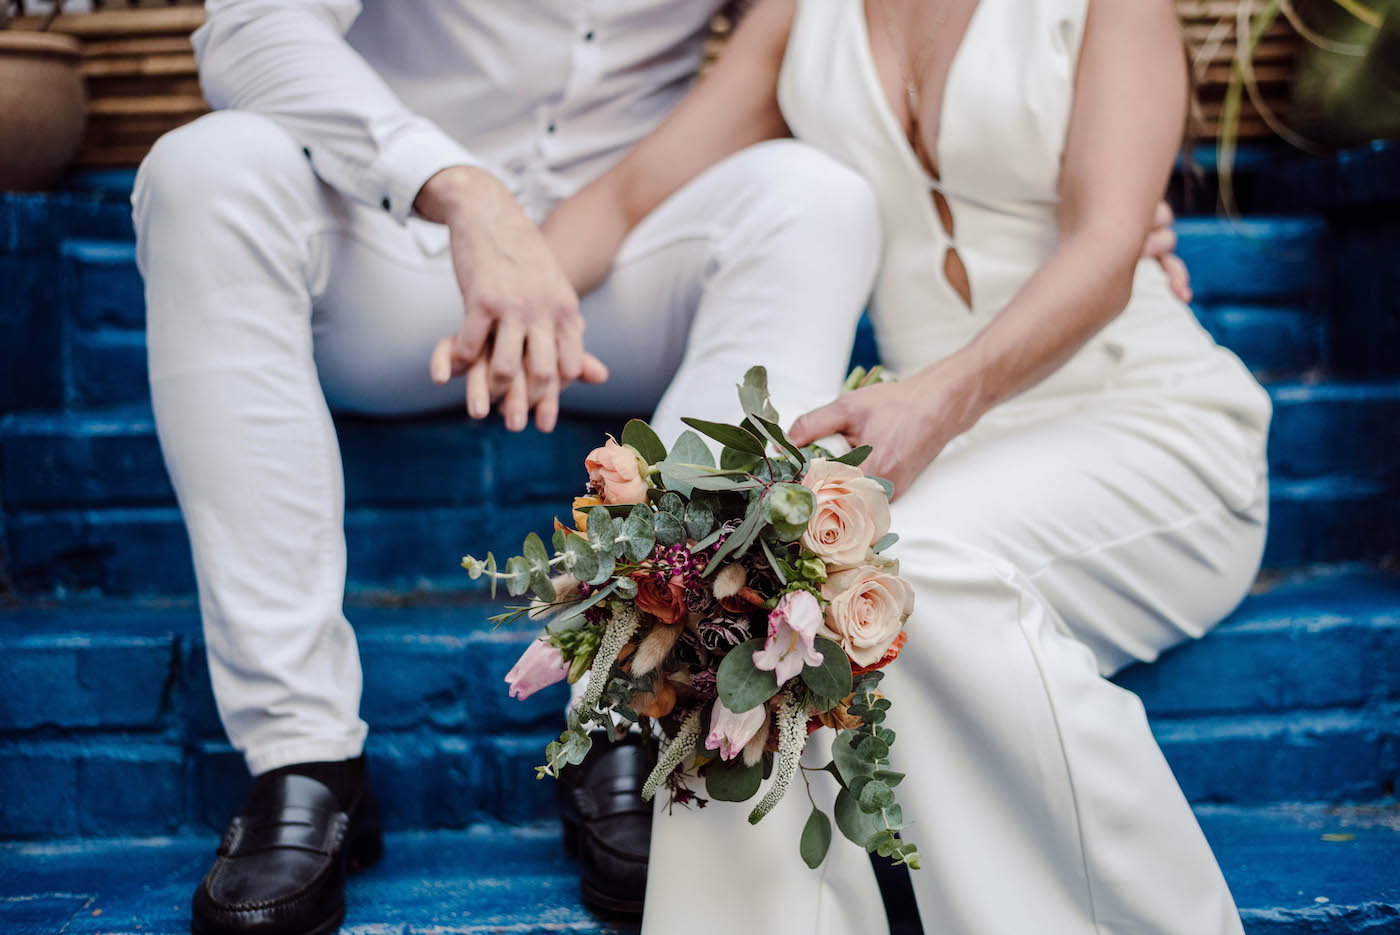 Bride and Groom Outdoor Wedding Portrait | COVID Wedding Elopement Backyard Ceremony | Ivory White Bridal Jumpsuit | Casual Groom White Shirt and Pants | DIY Peach and Pink Bridal Bouquet with Roses Tulips and Eucalyptus Greenery